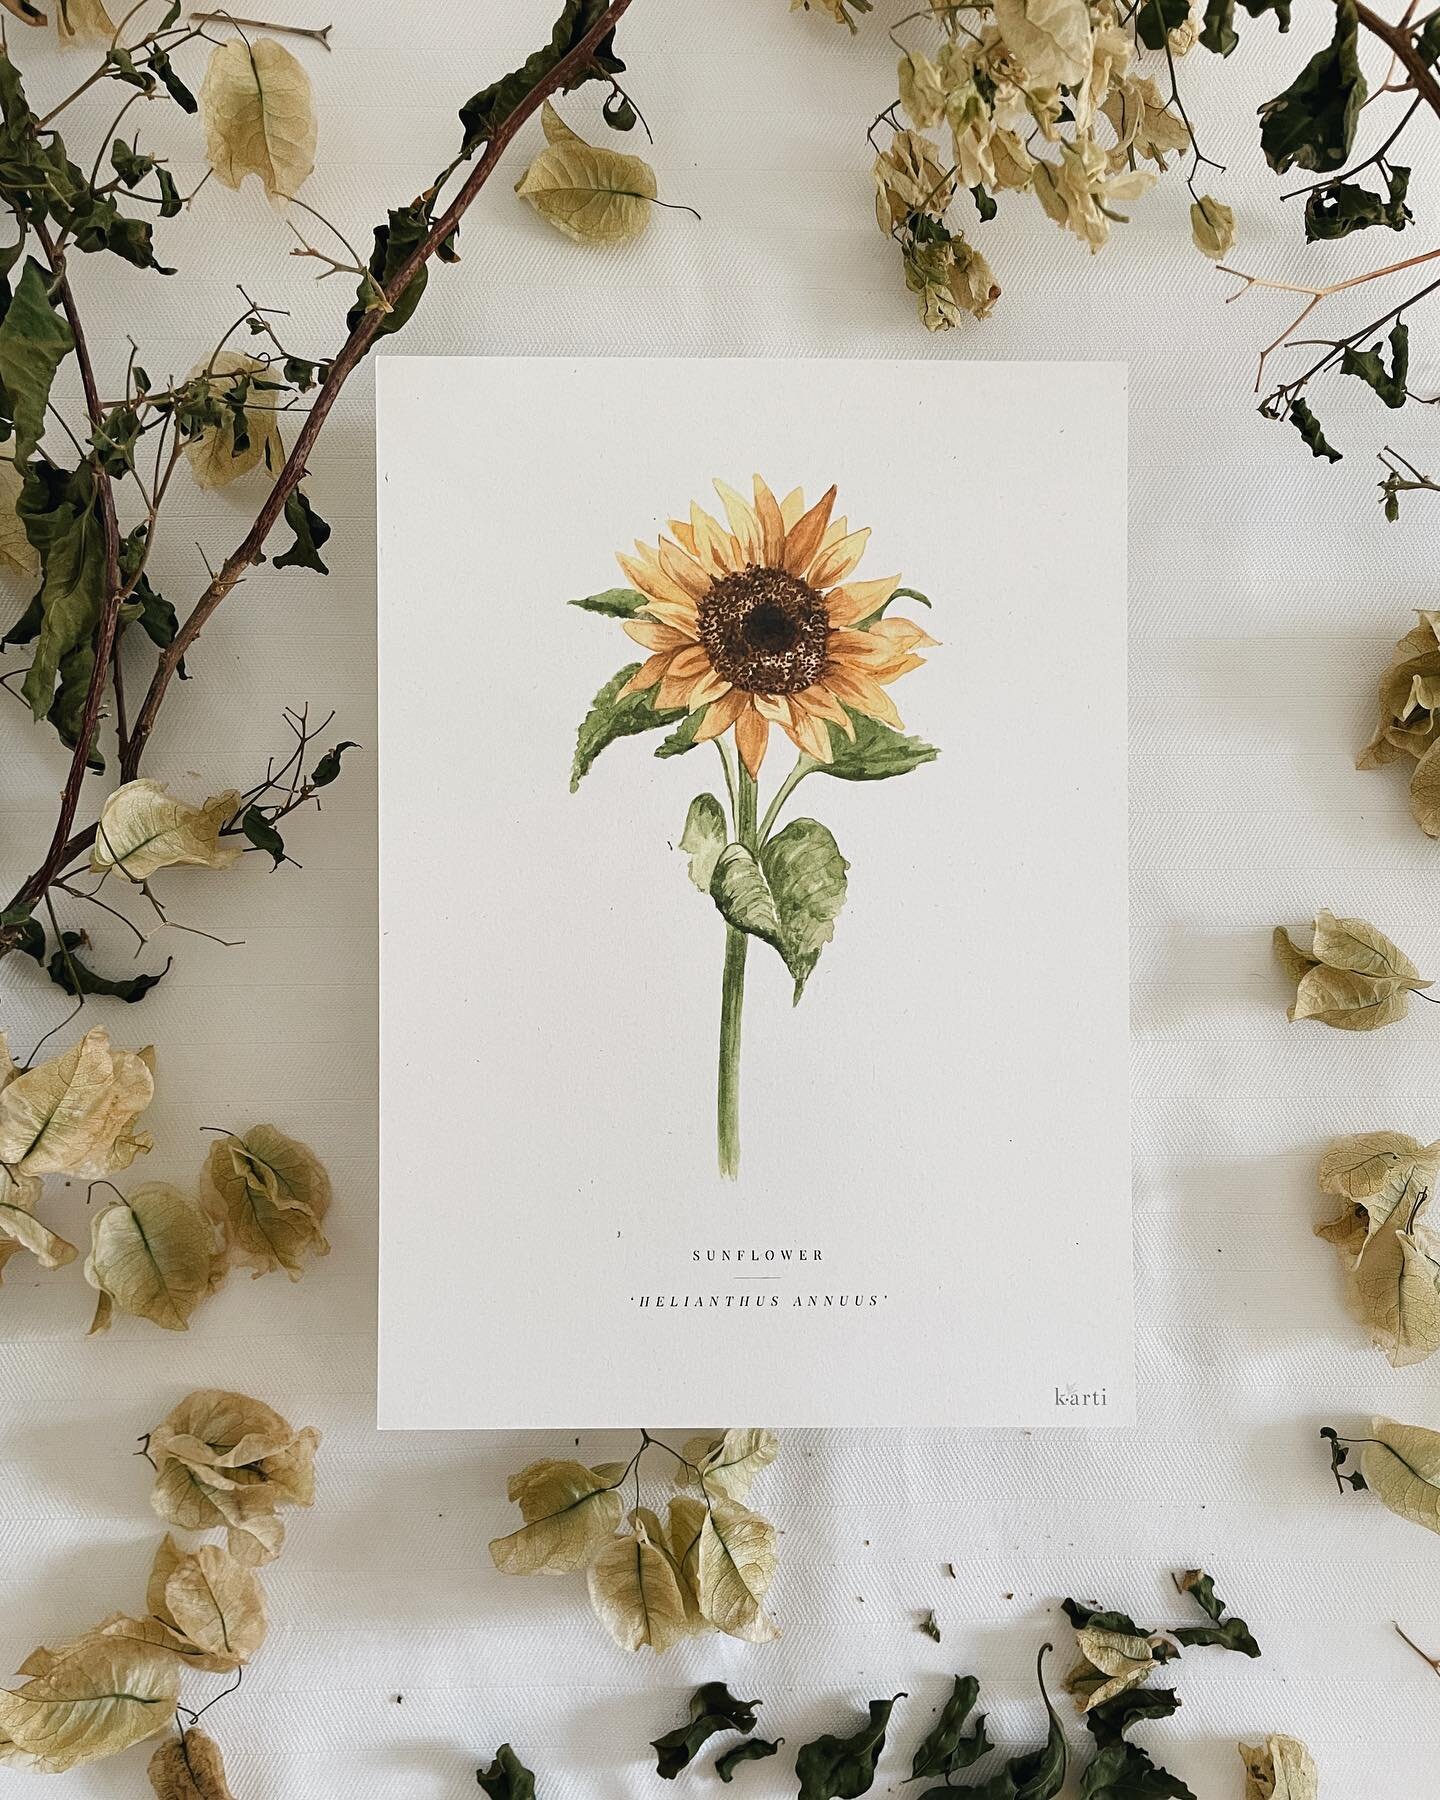 New ART PRINTS 💛💐

These art prints were created using some of our favourite floral and fruit artworks from the Natura collection prints featured in our 2024 Calendar and Diary 🫶🏽 Each print features one of six different artworks from the collect